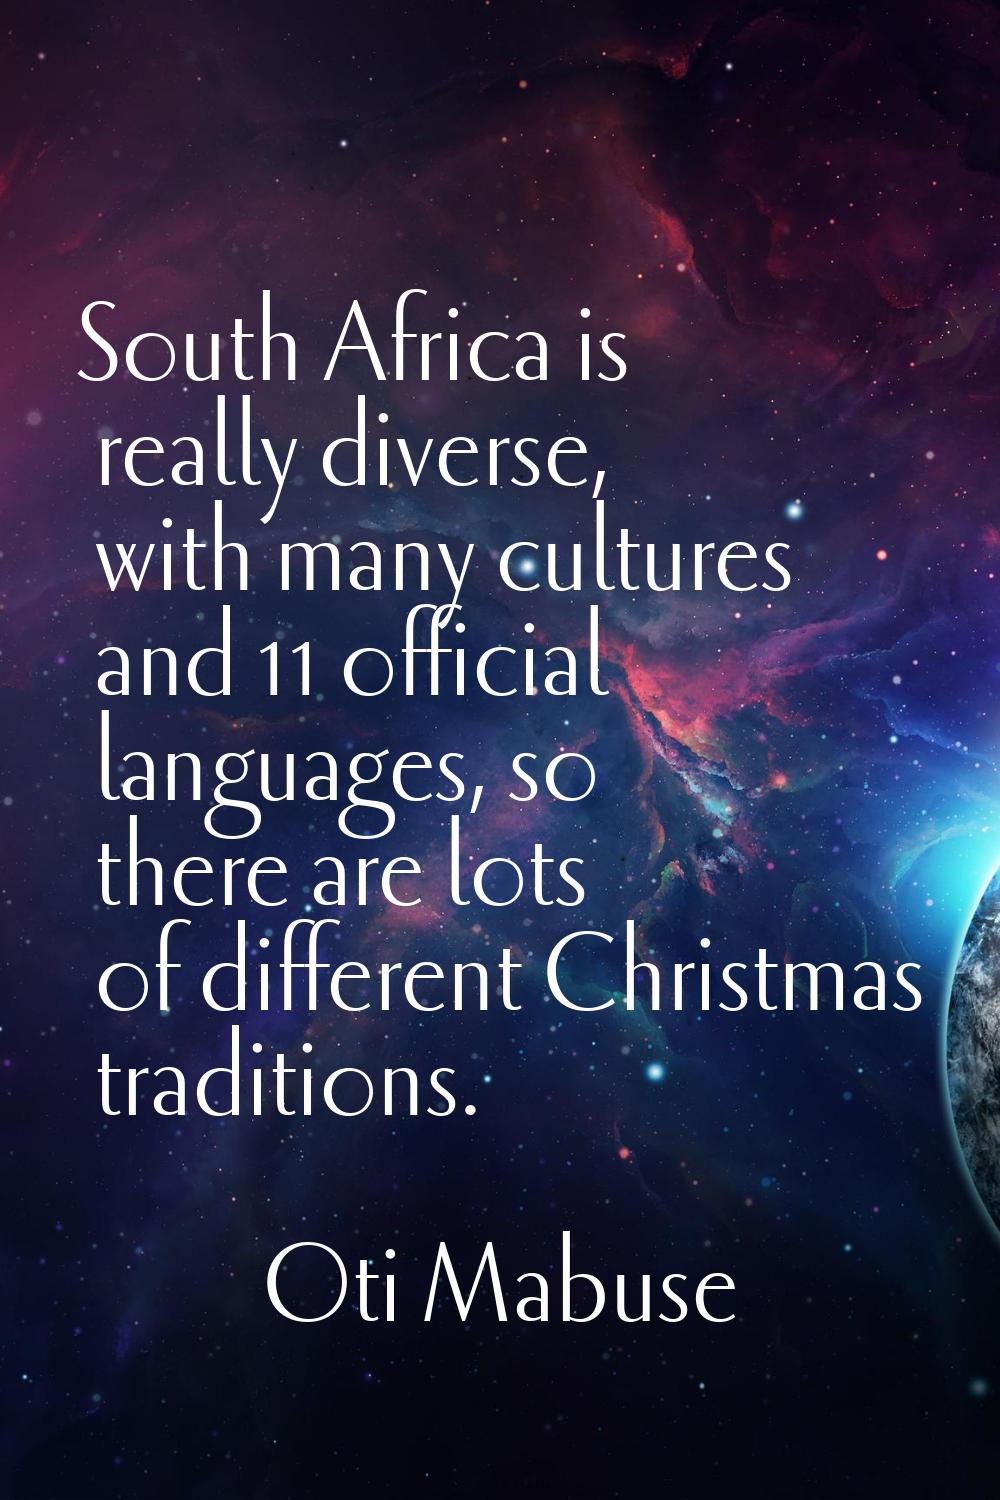 South Africa is really diverse, with many cultures and 11 official languages, so there are lots of 